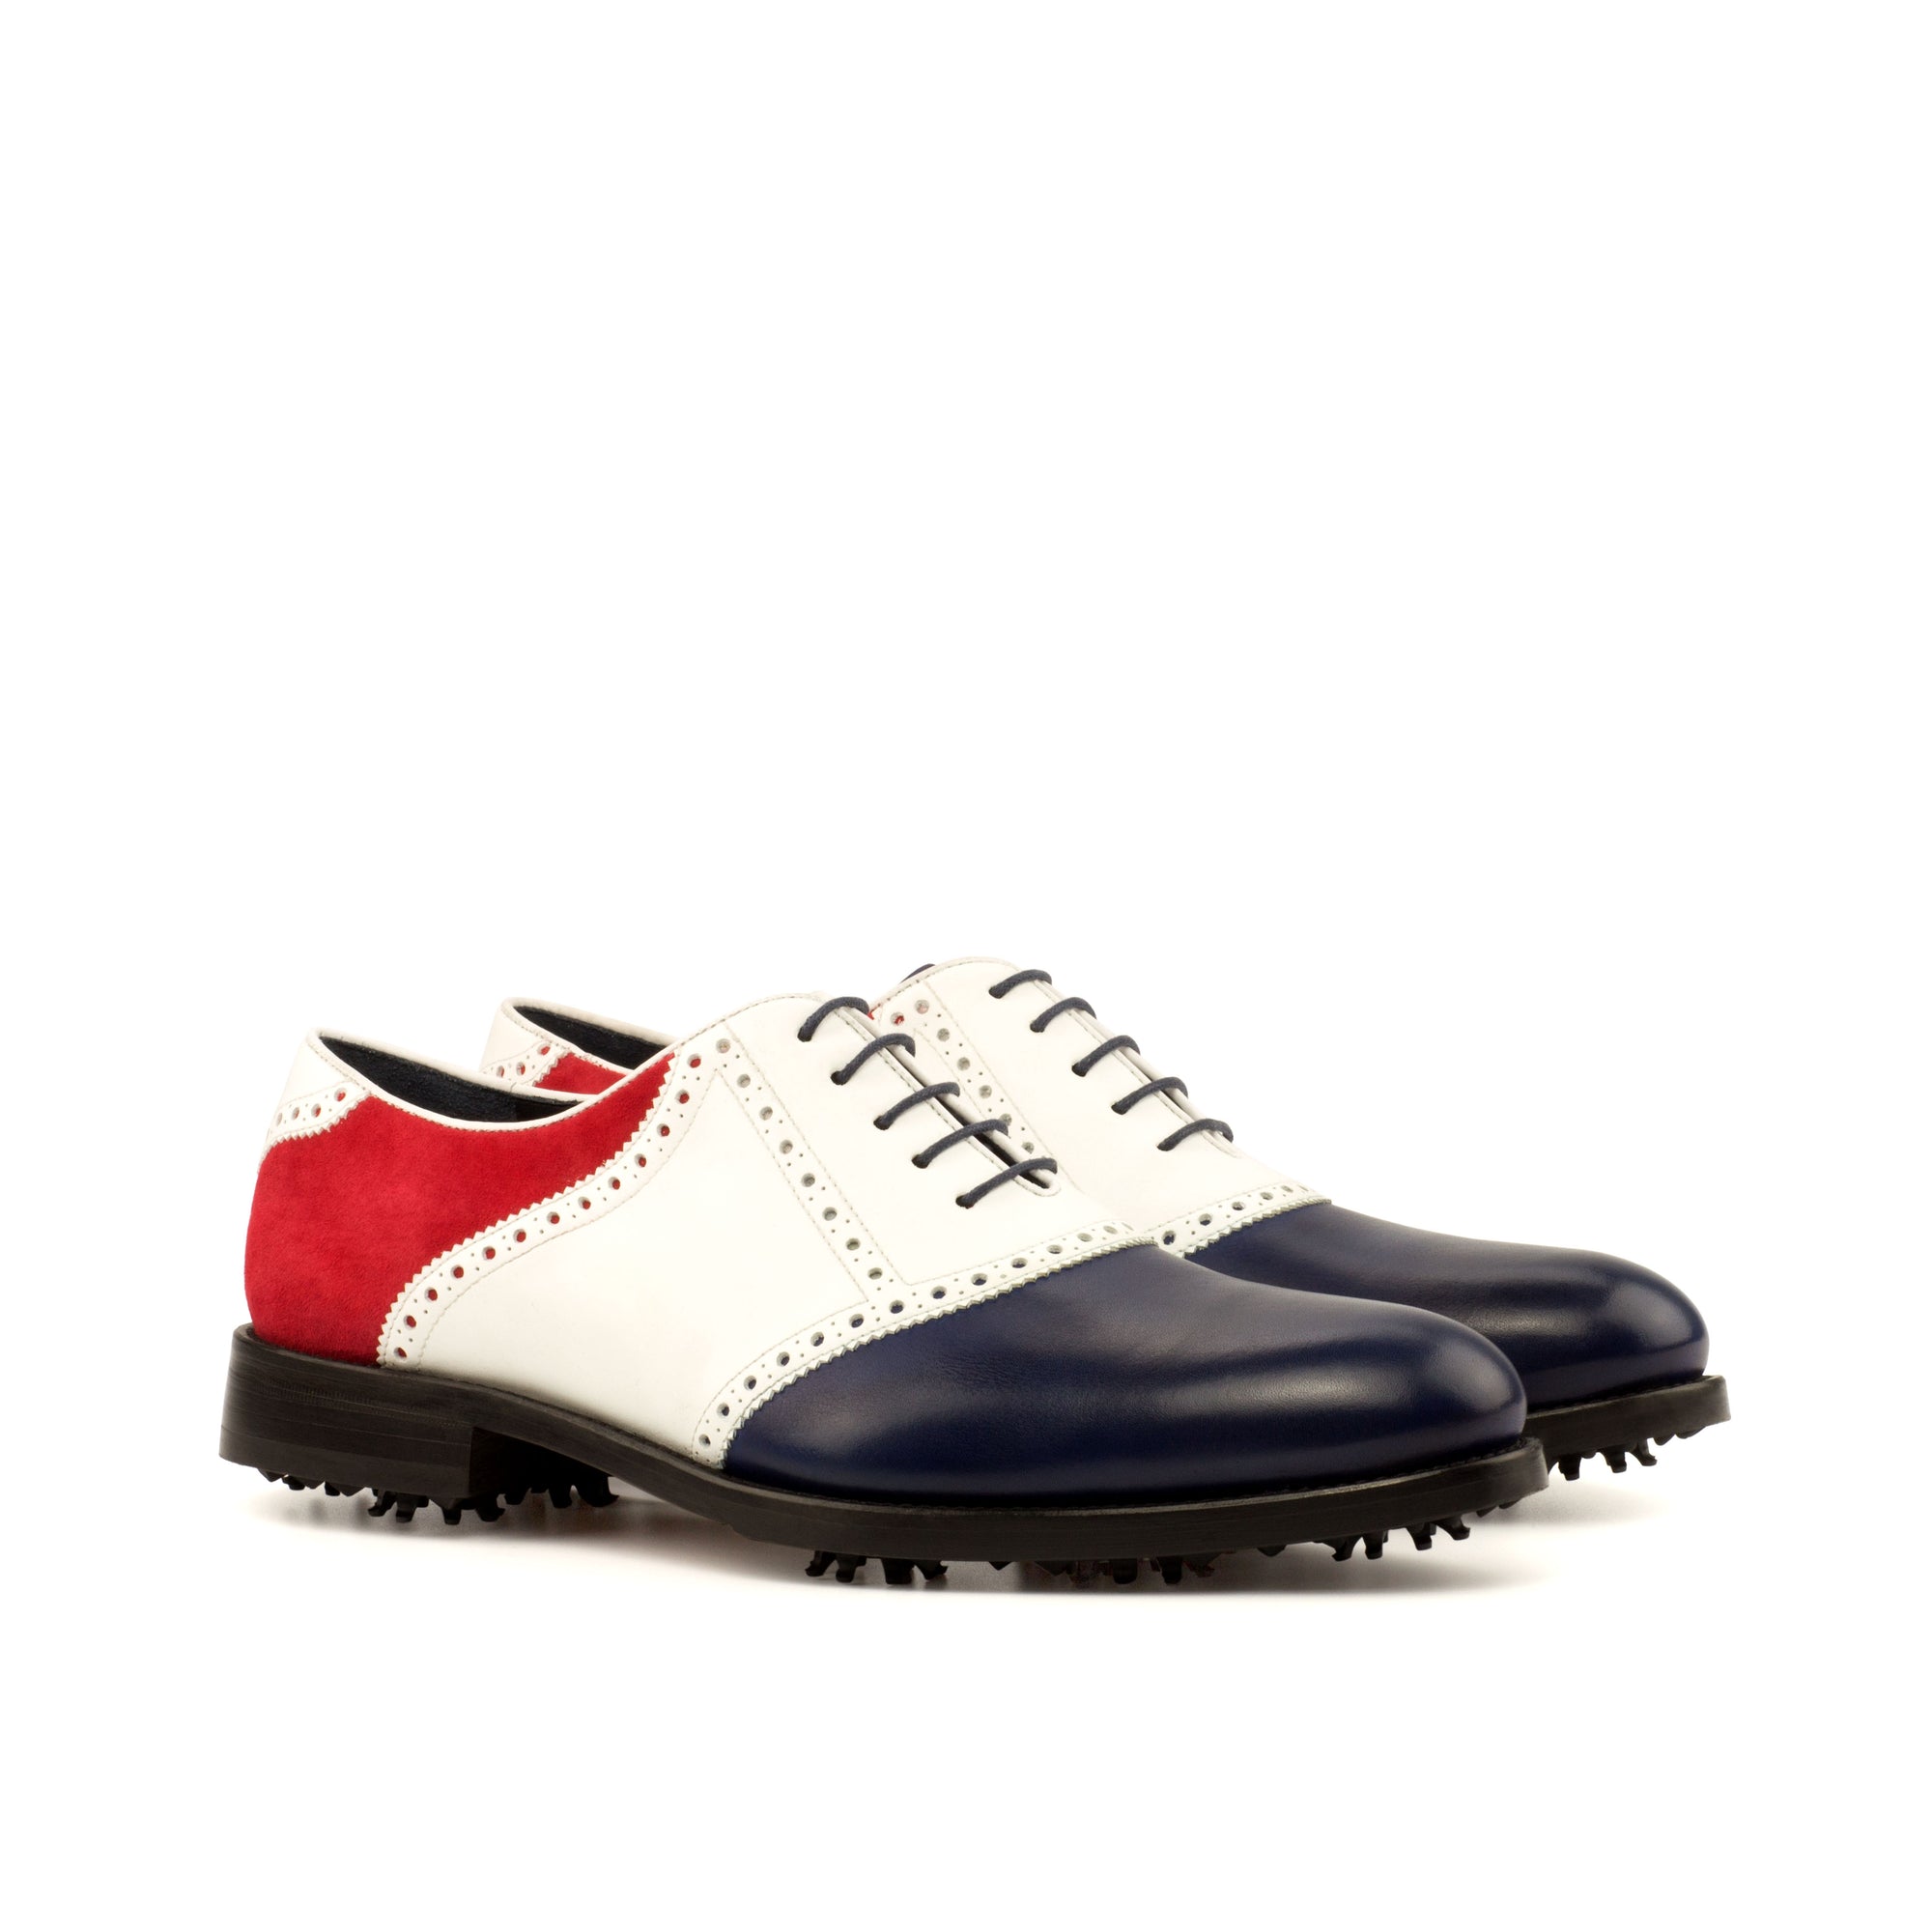 Golf Shoes Premium Handcrafted - Soft Spikes, Spanish Artisan Made, Great for Golf Enthusiasts